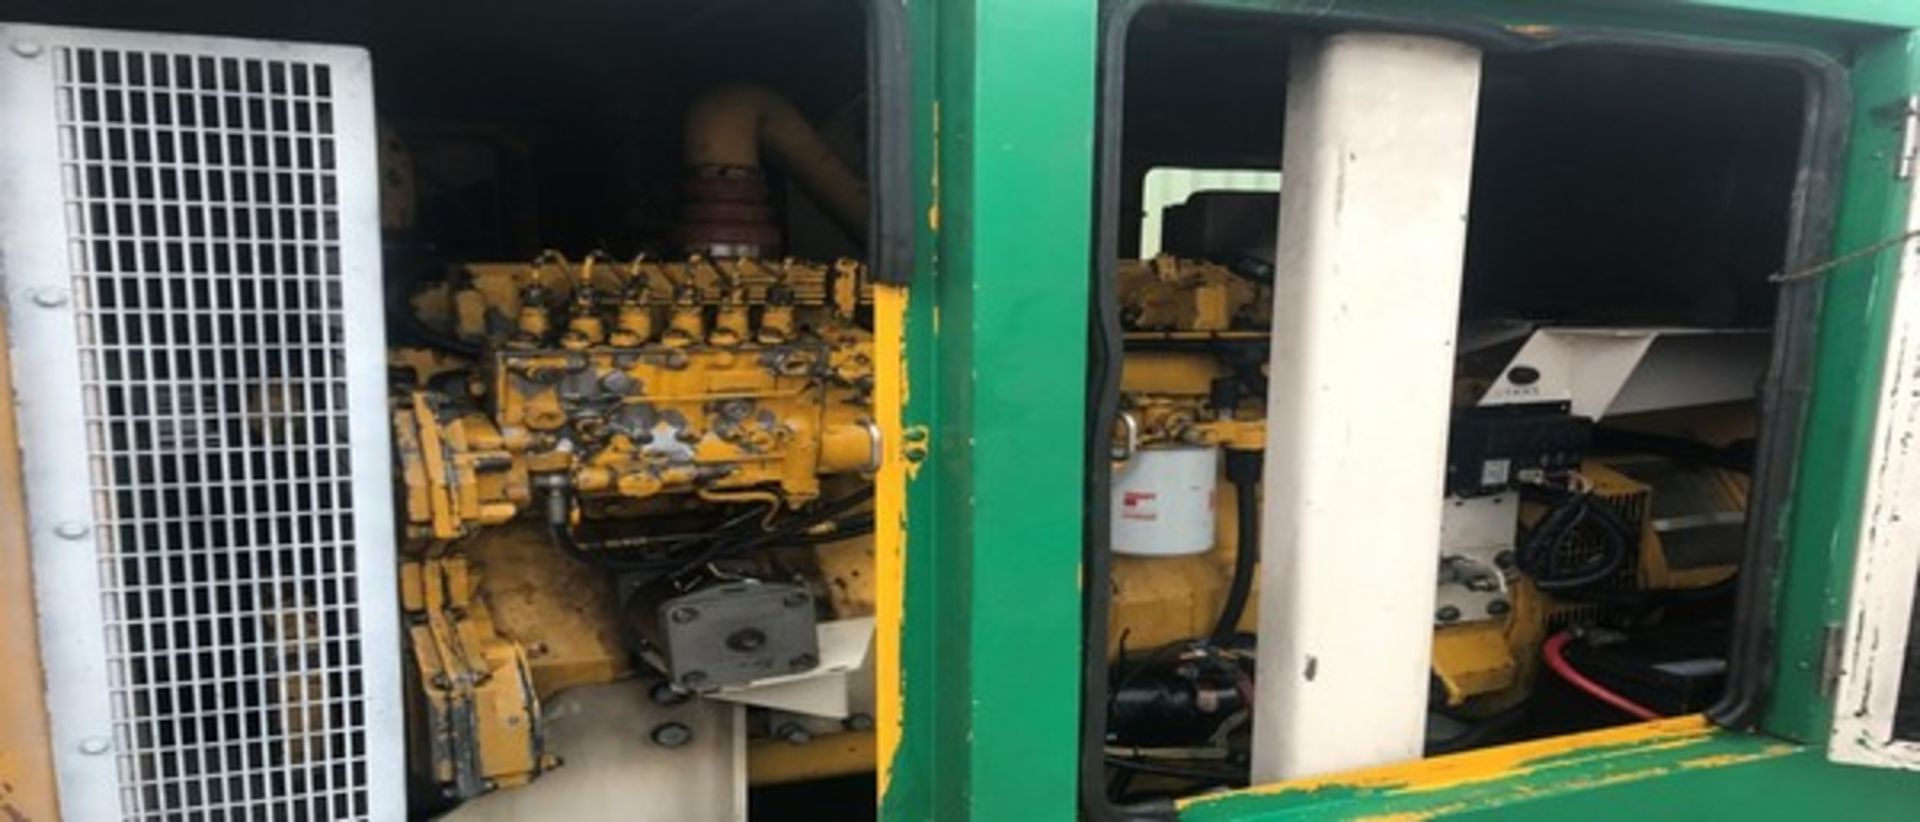 1998 F G WILSON P160 generator. S/N C8251C/003. 38564 hrs. Engine refurbished April 2016. Only worke - Image 3 of 7